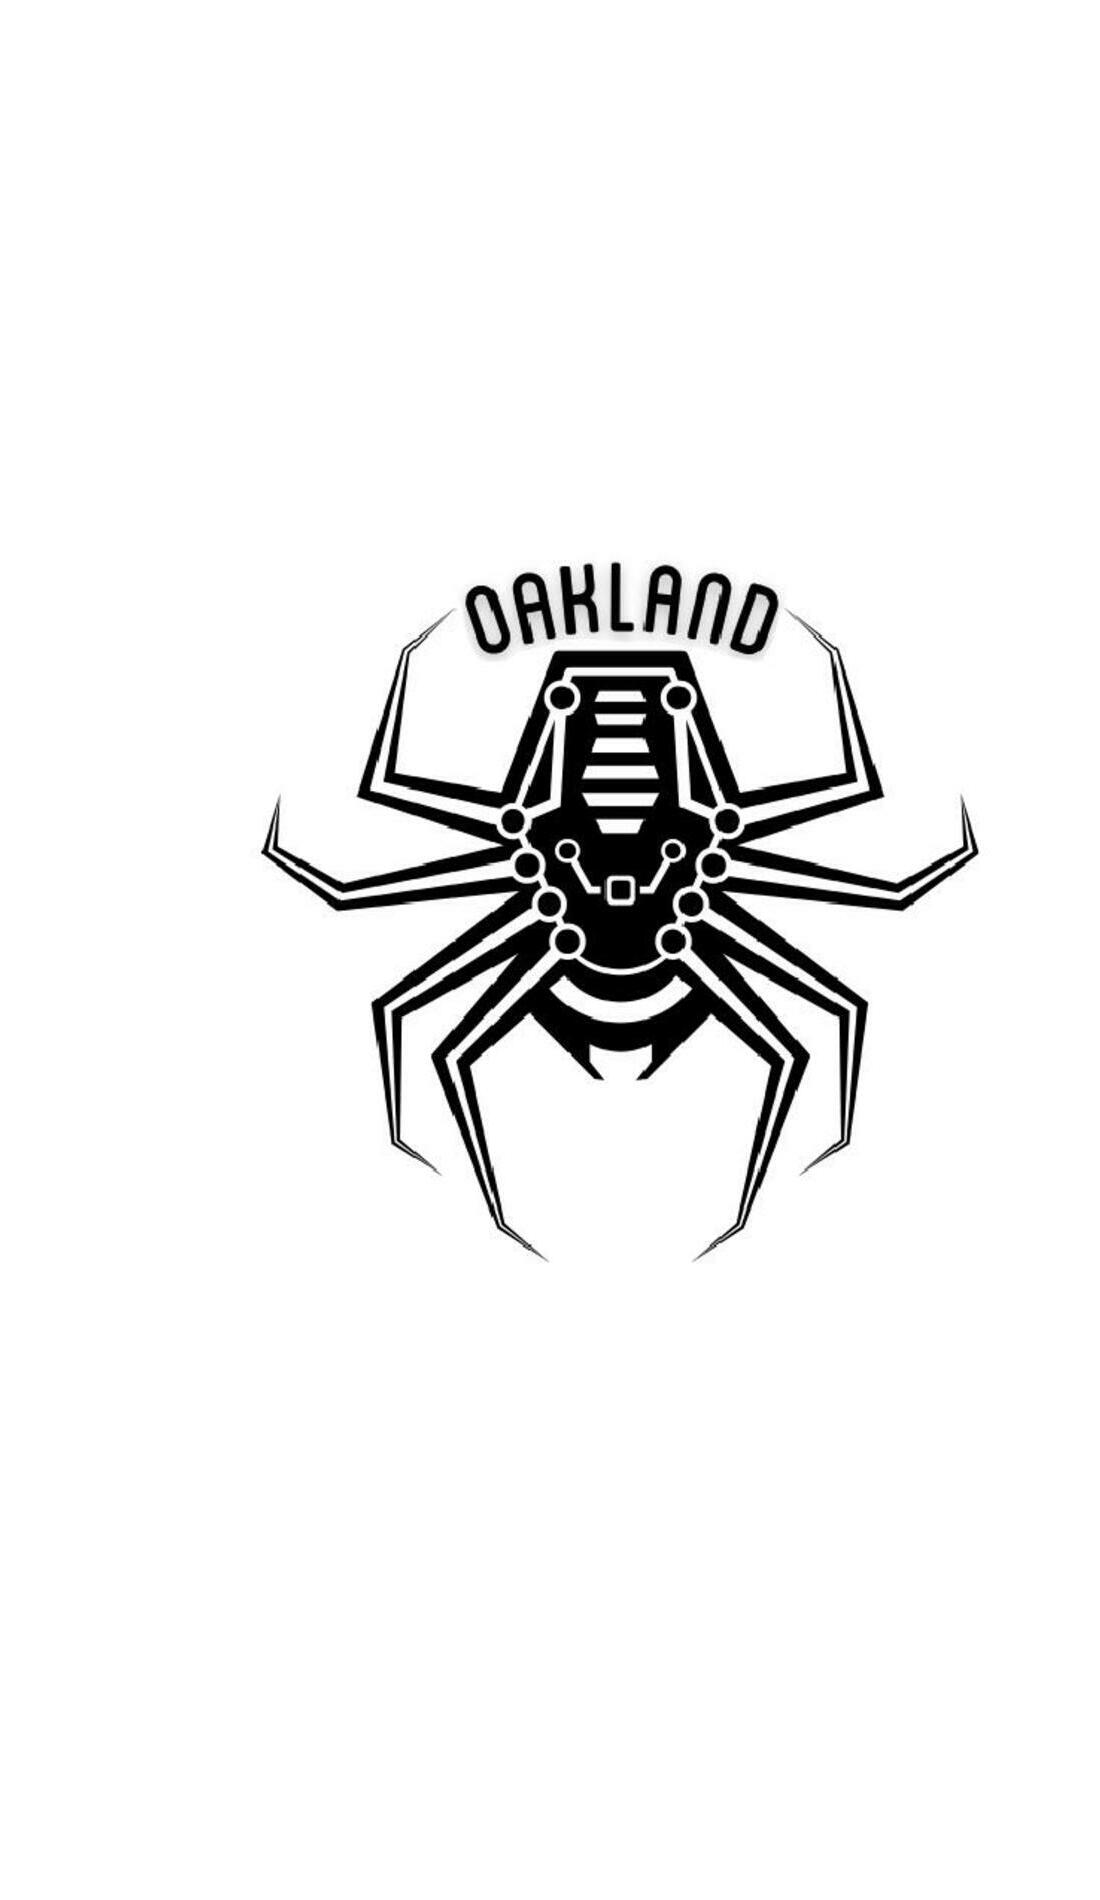 A Oakland Spiders live event